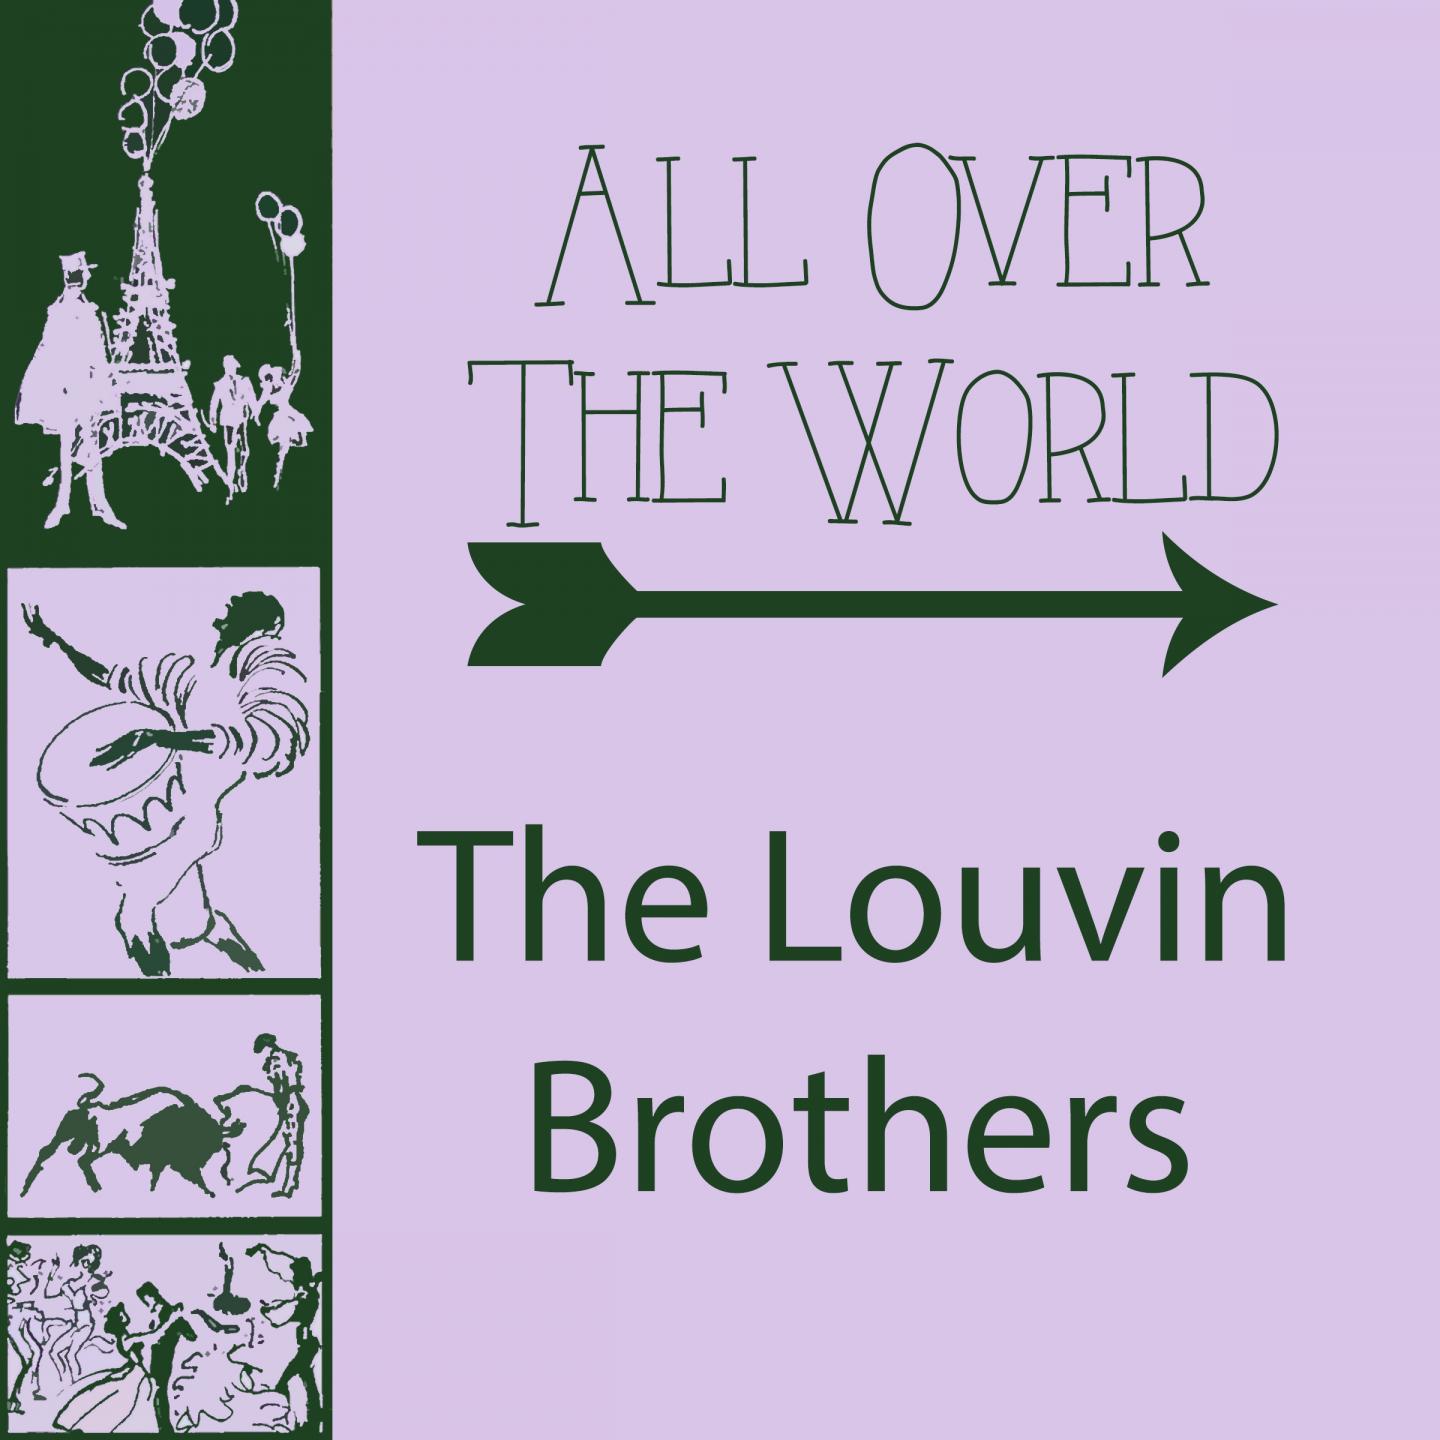 All Over The World - The Louvin Brothers - 专辑 - 网易云音乐